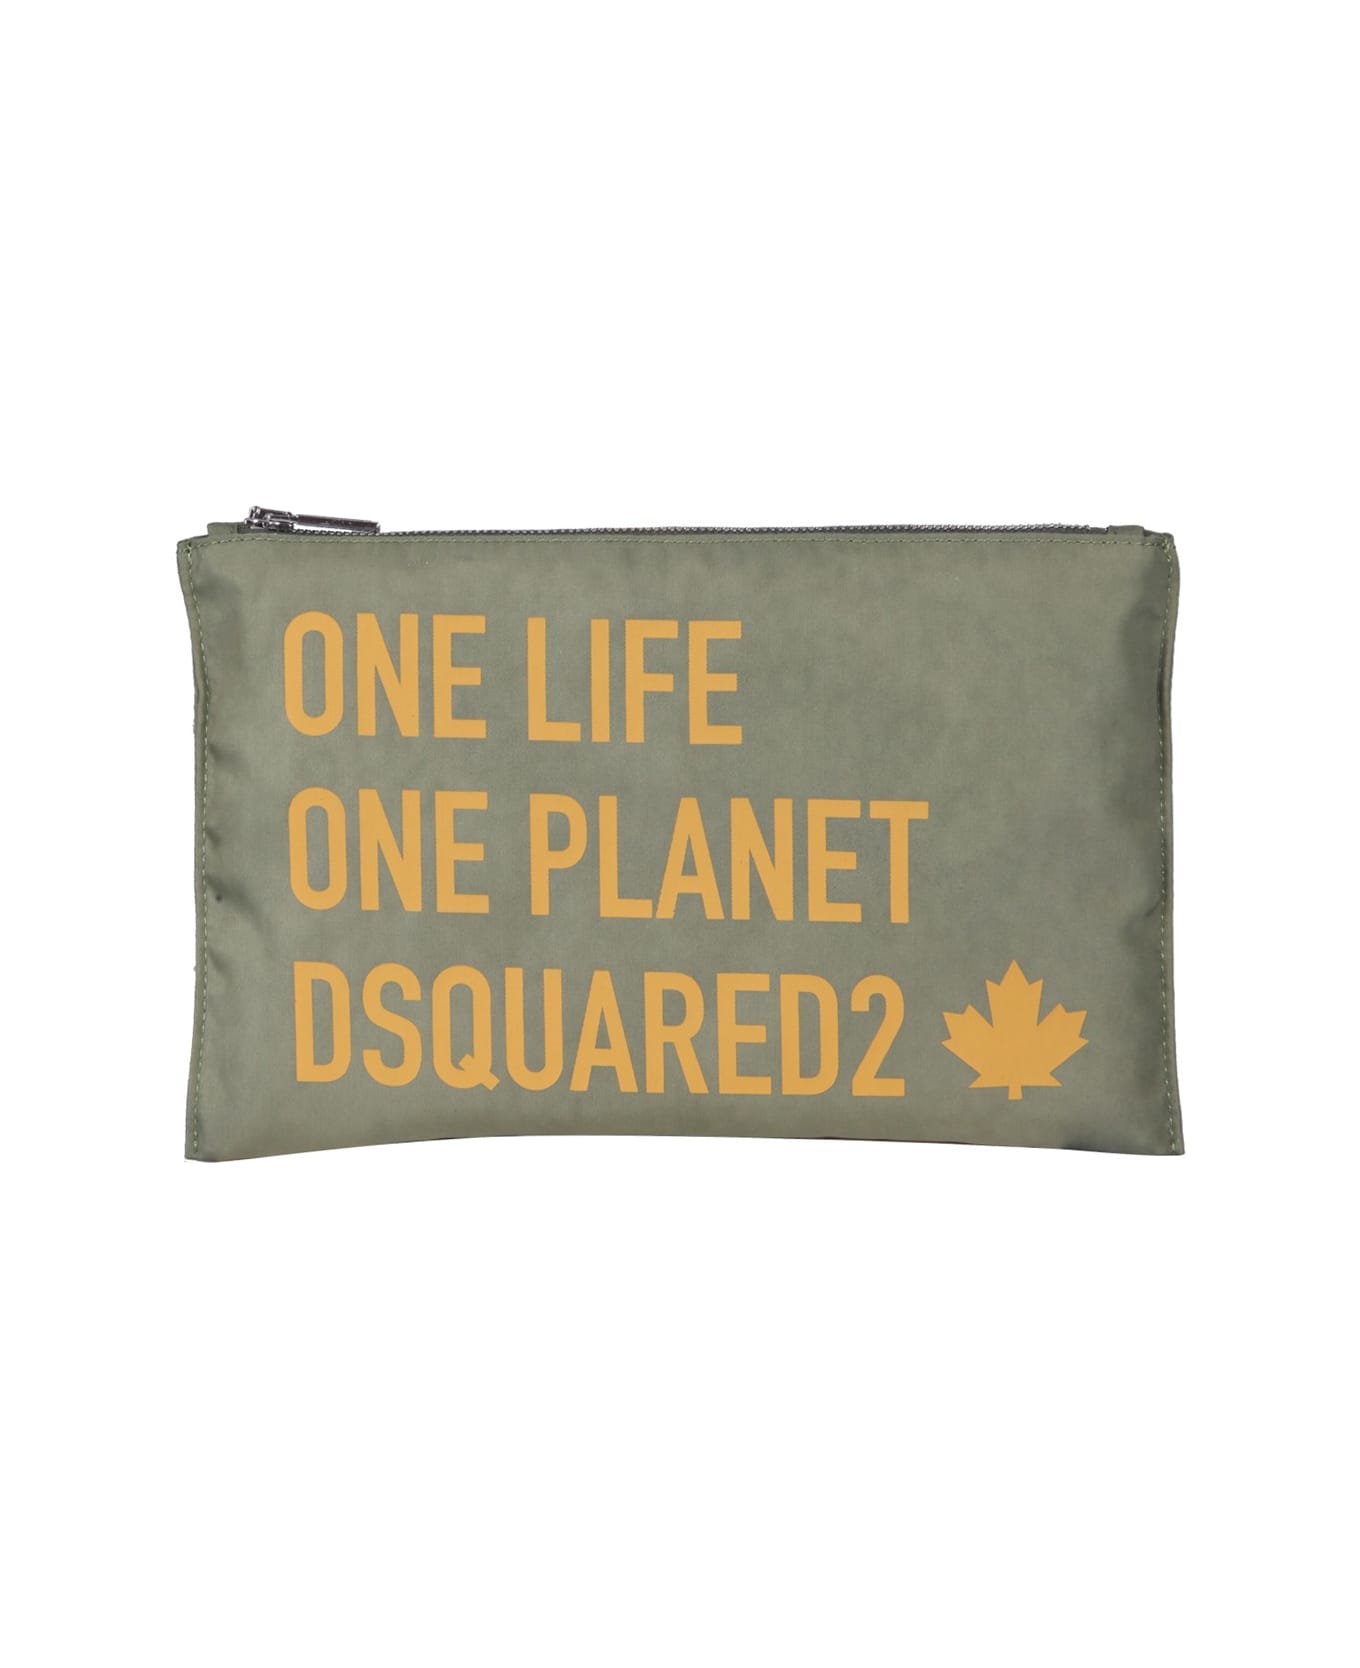 Dsquared2 Recycled Nylon Clutch Bag - VERDE